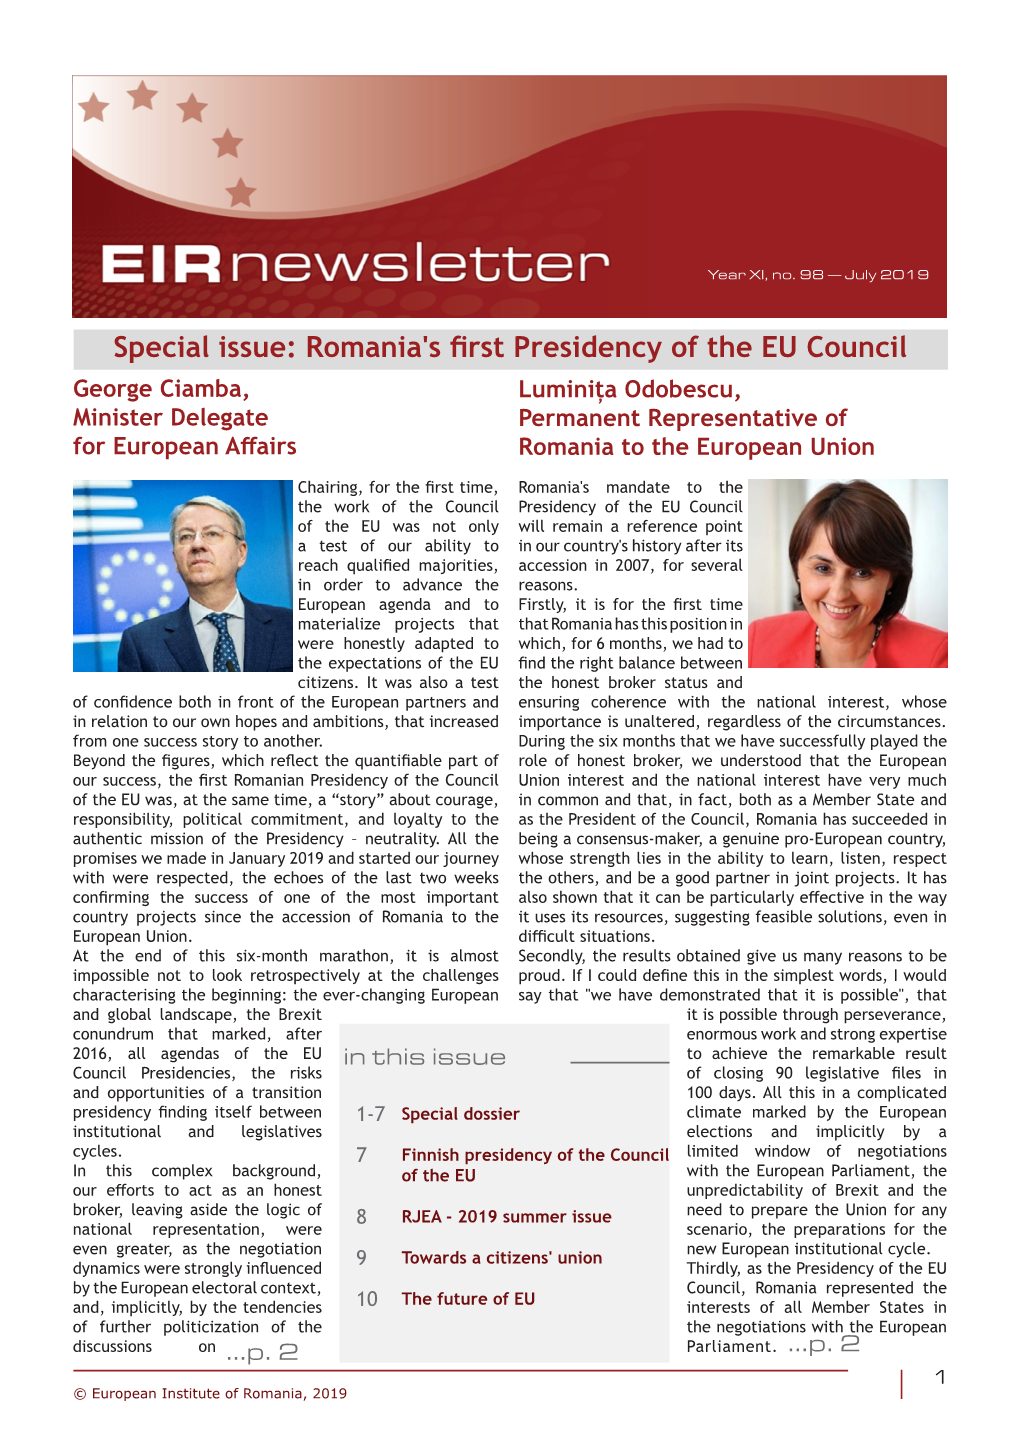 Special Issue: Romania's First Presidency of the EU Council